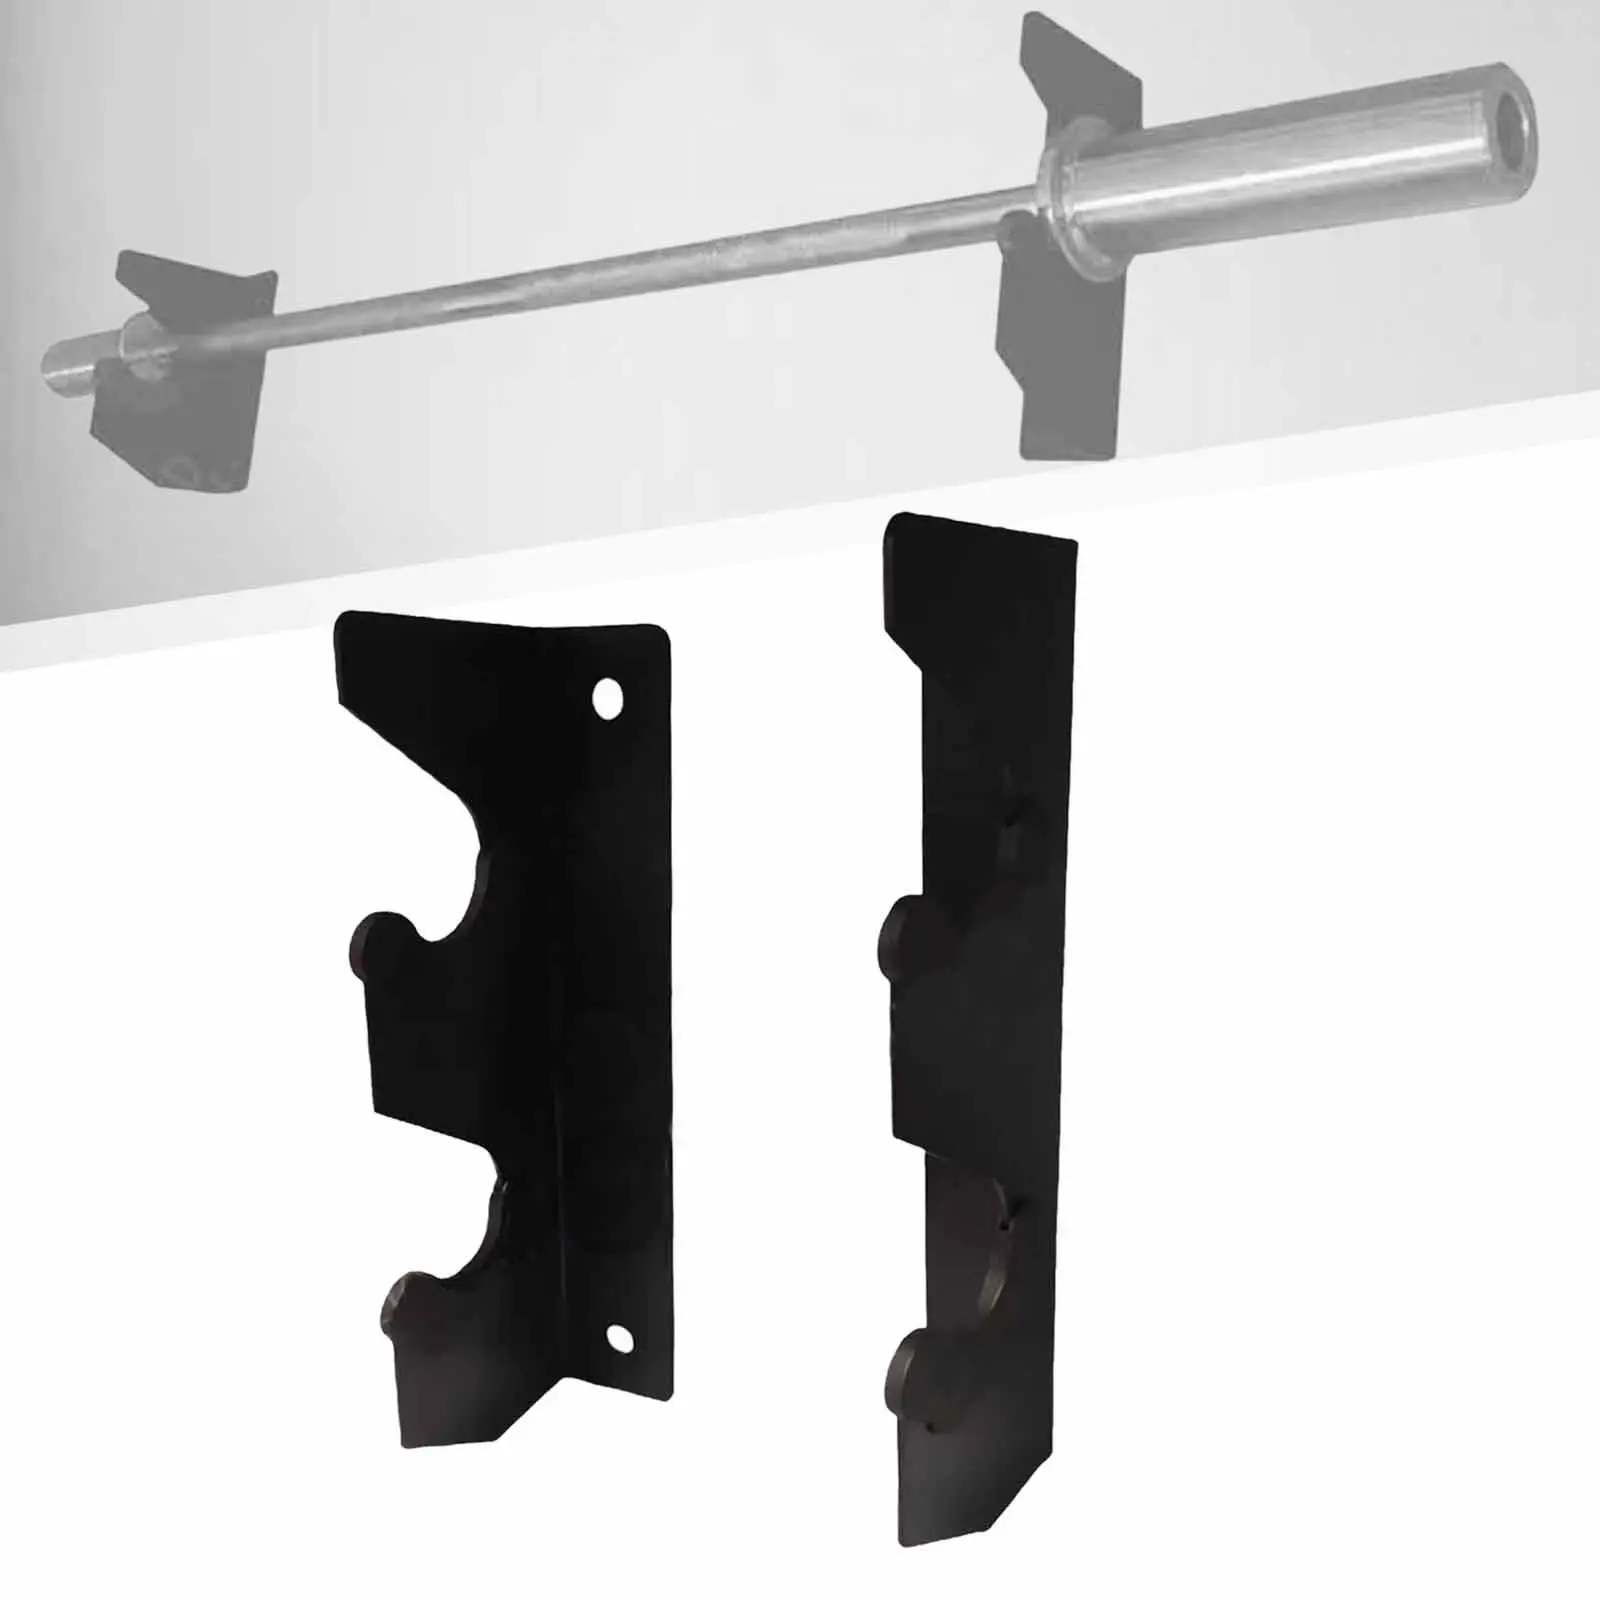 2Pcs Wall Mounted Barbell Rack Organizer Bracket Barbell Holder for Commercial Home Garage Triceps Bar Training